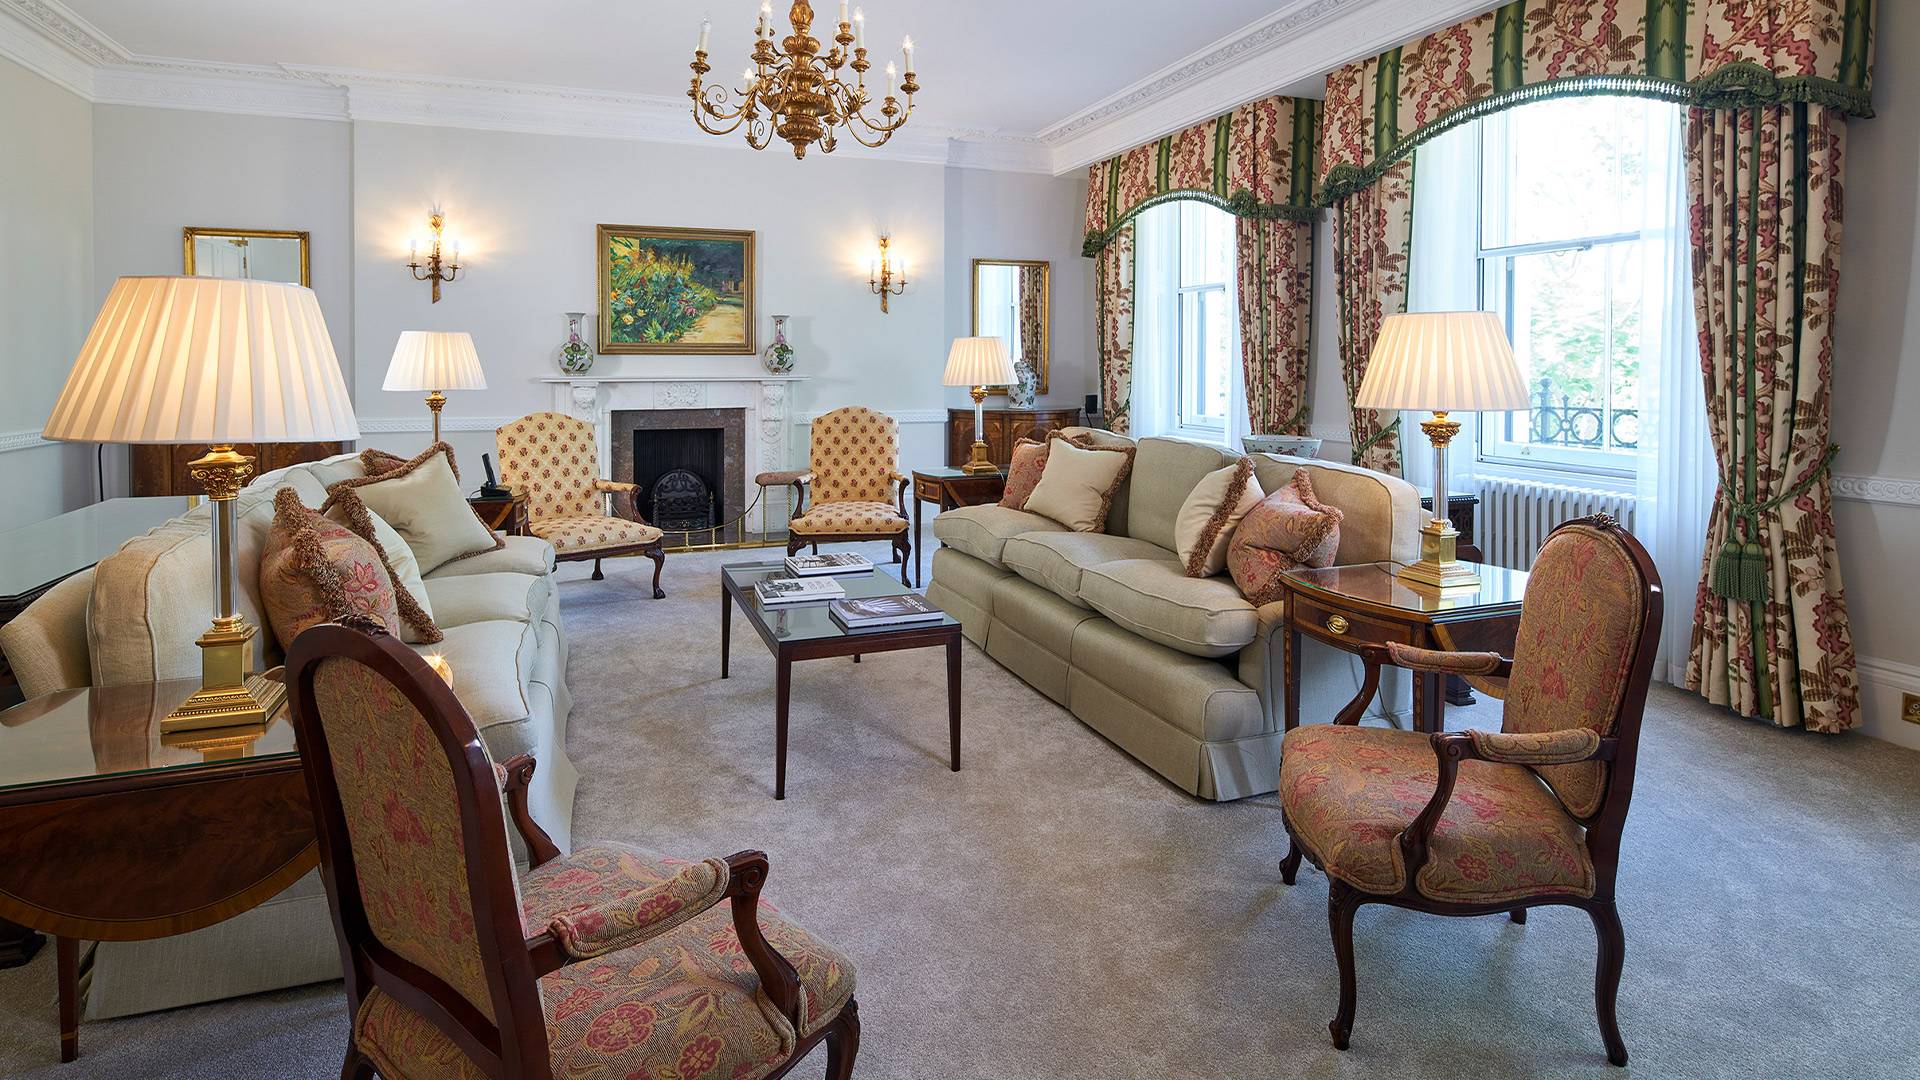 Luxury Third-Floor Three-Bedroom Serviced Apartment in a Palatial Kensington Residence with Spectacular Hyde Park Views and Premium Amenities